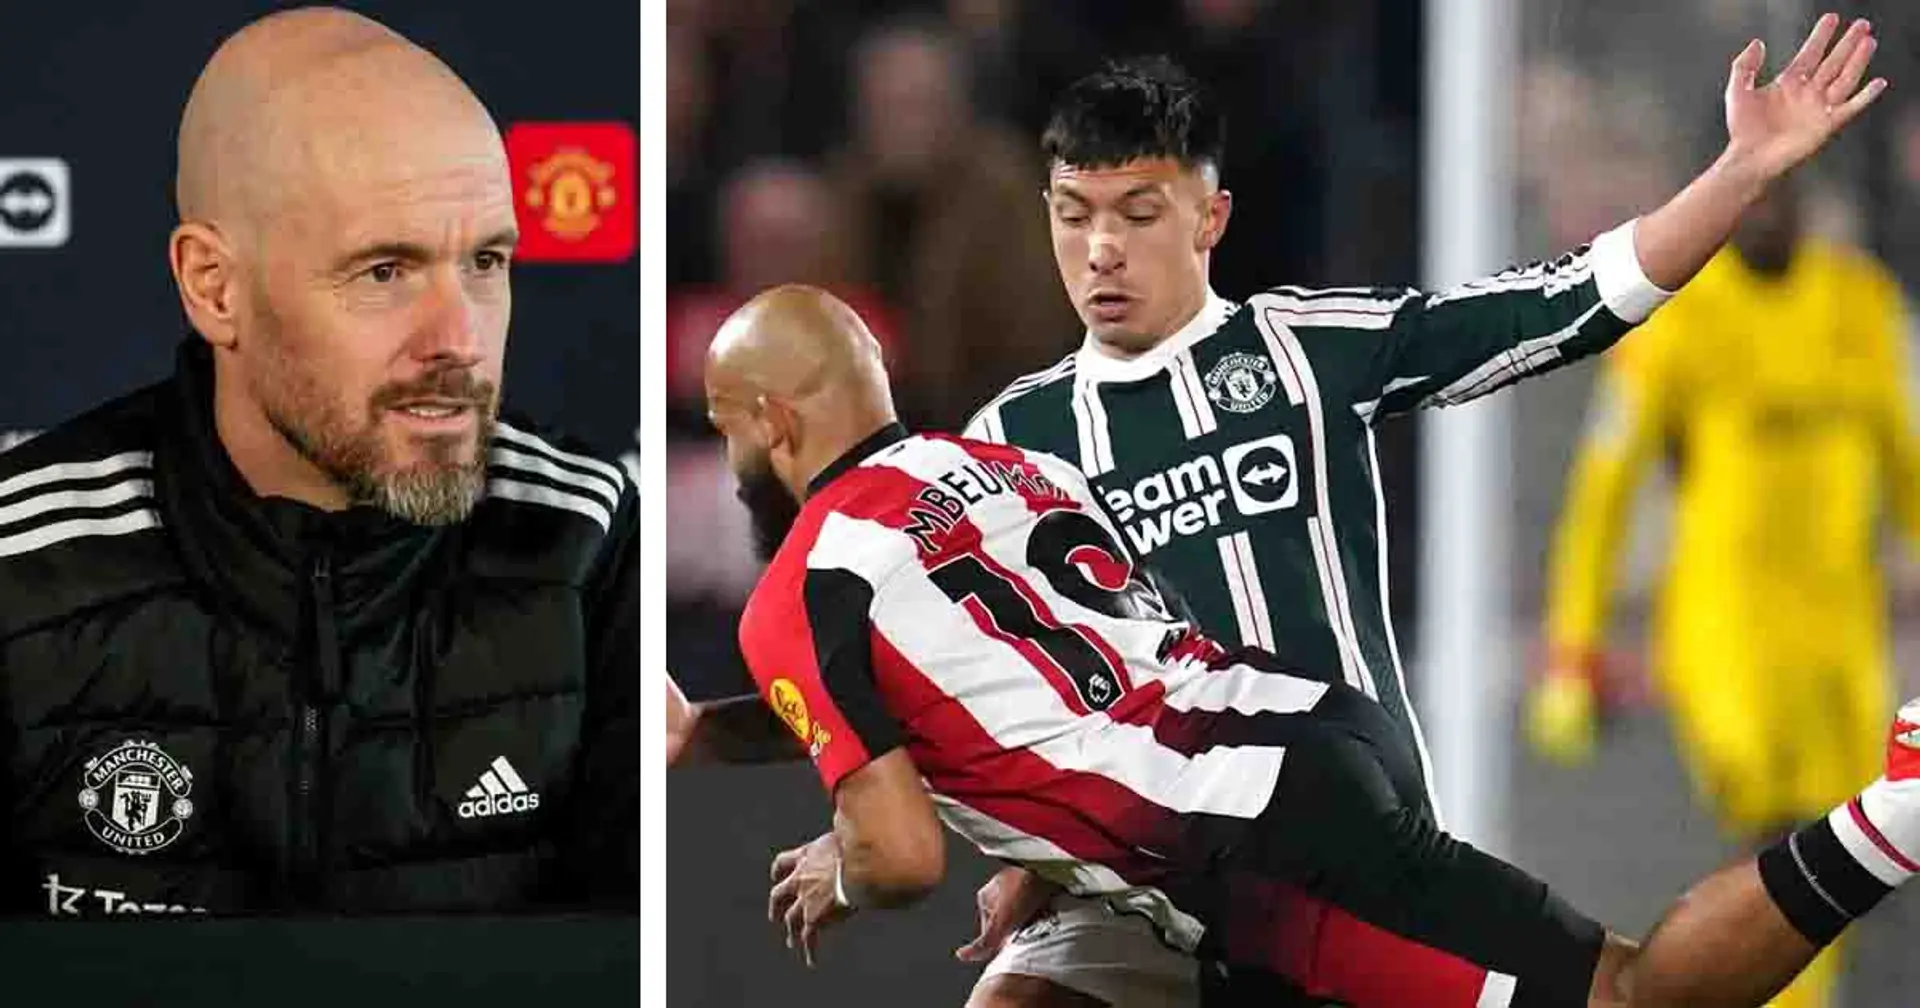 Ten Hag provides key fitness updates on three Man United stars, gives cagey response to injury pile-up